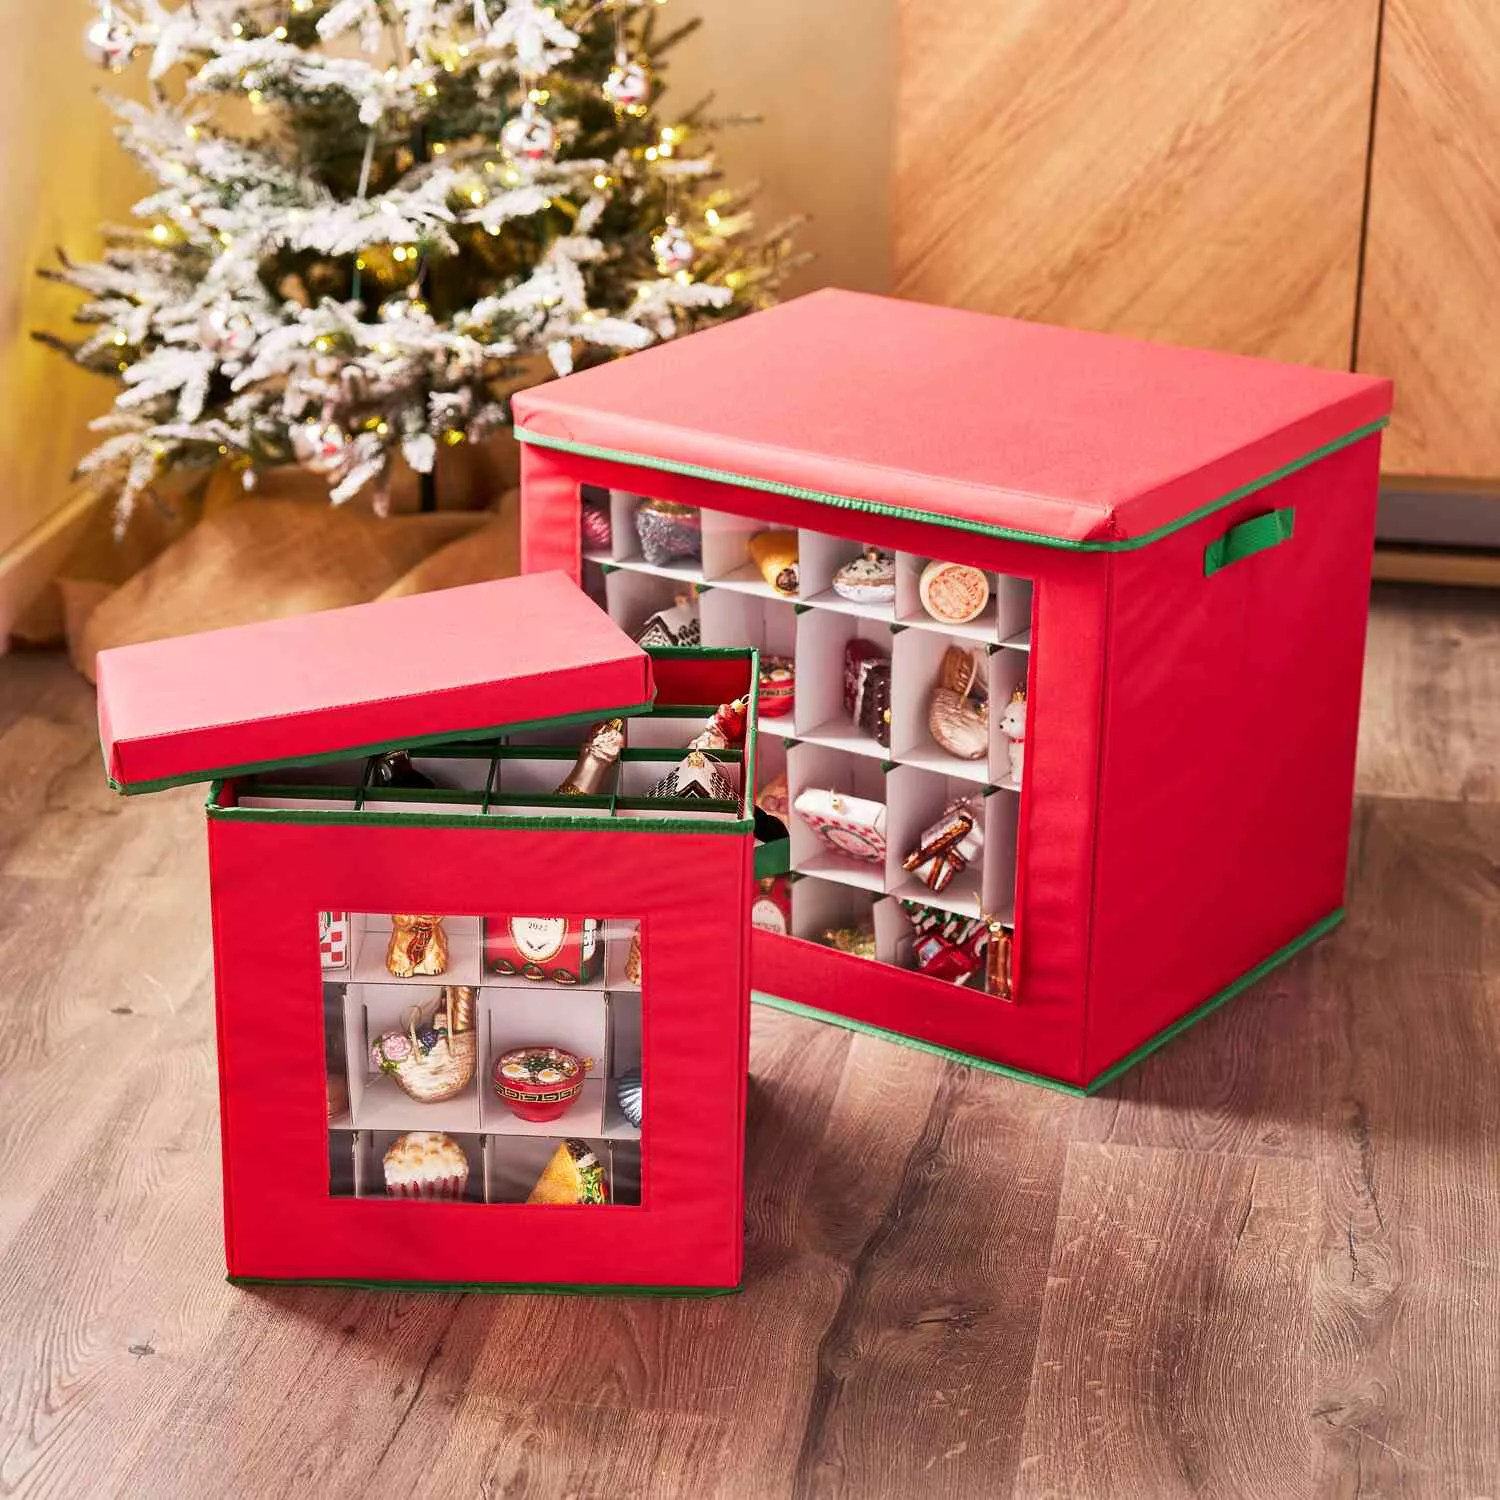 Honey Can Do Ornament Storage, 120 Cube